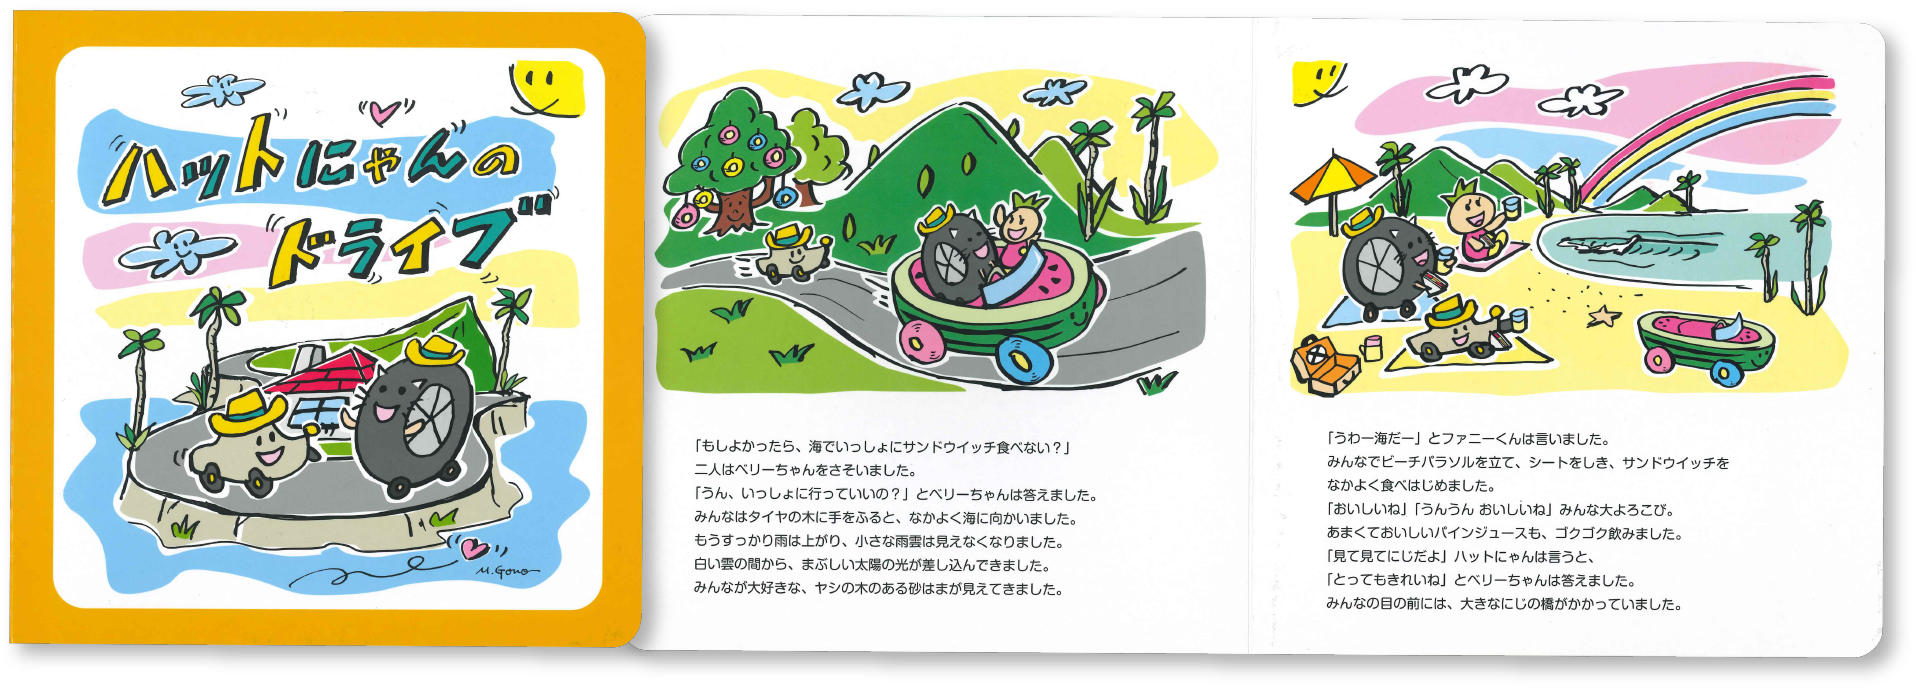 Traffic Safety Picture Book 'Hat-nyan's Drive'